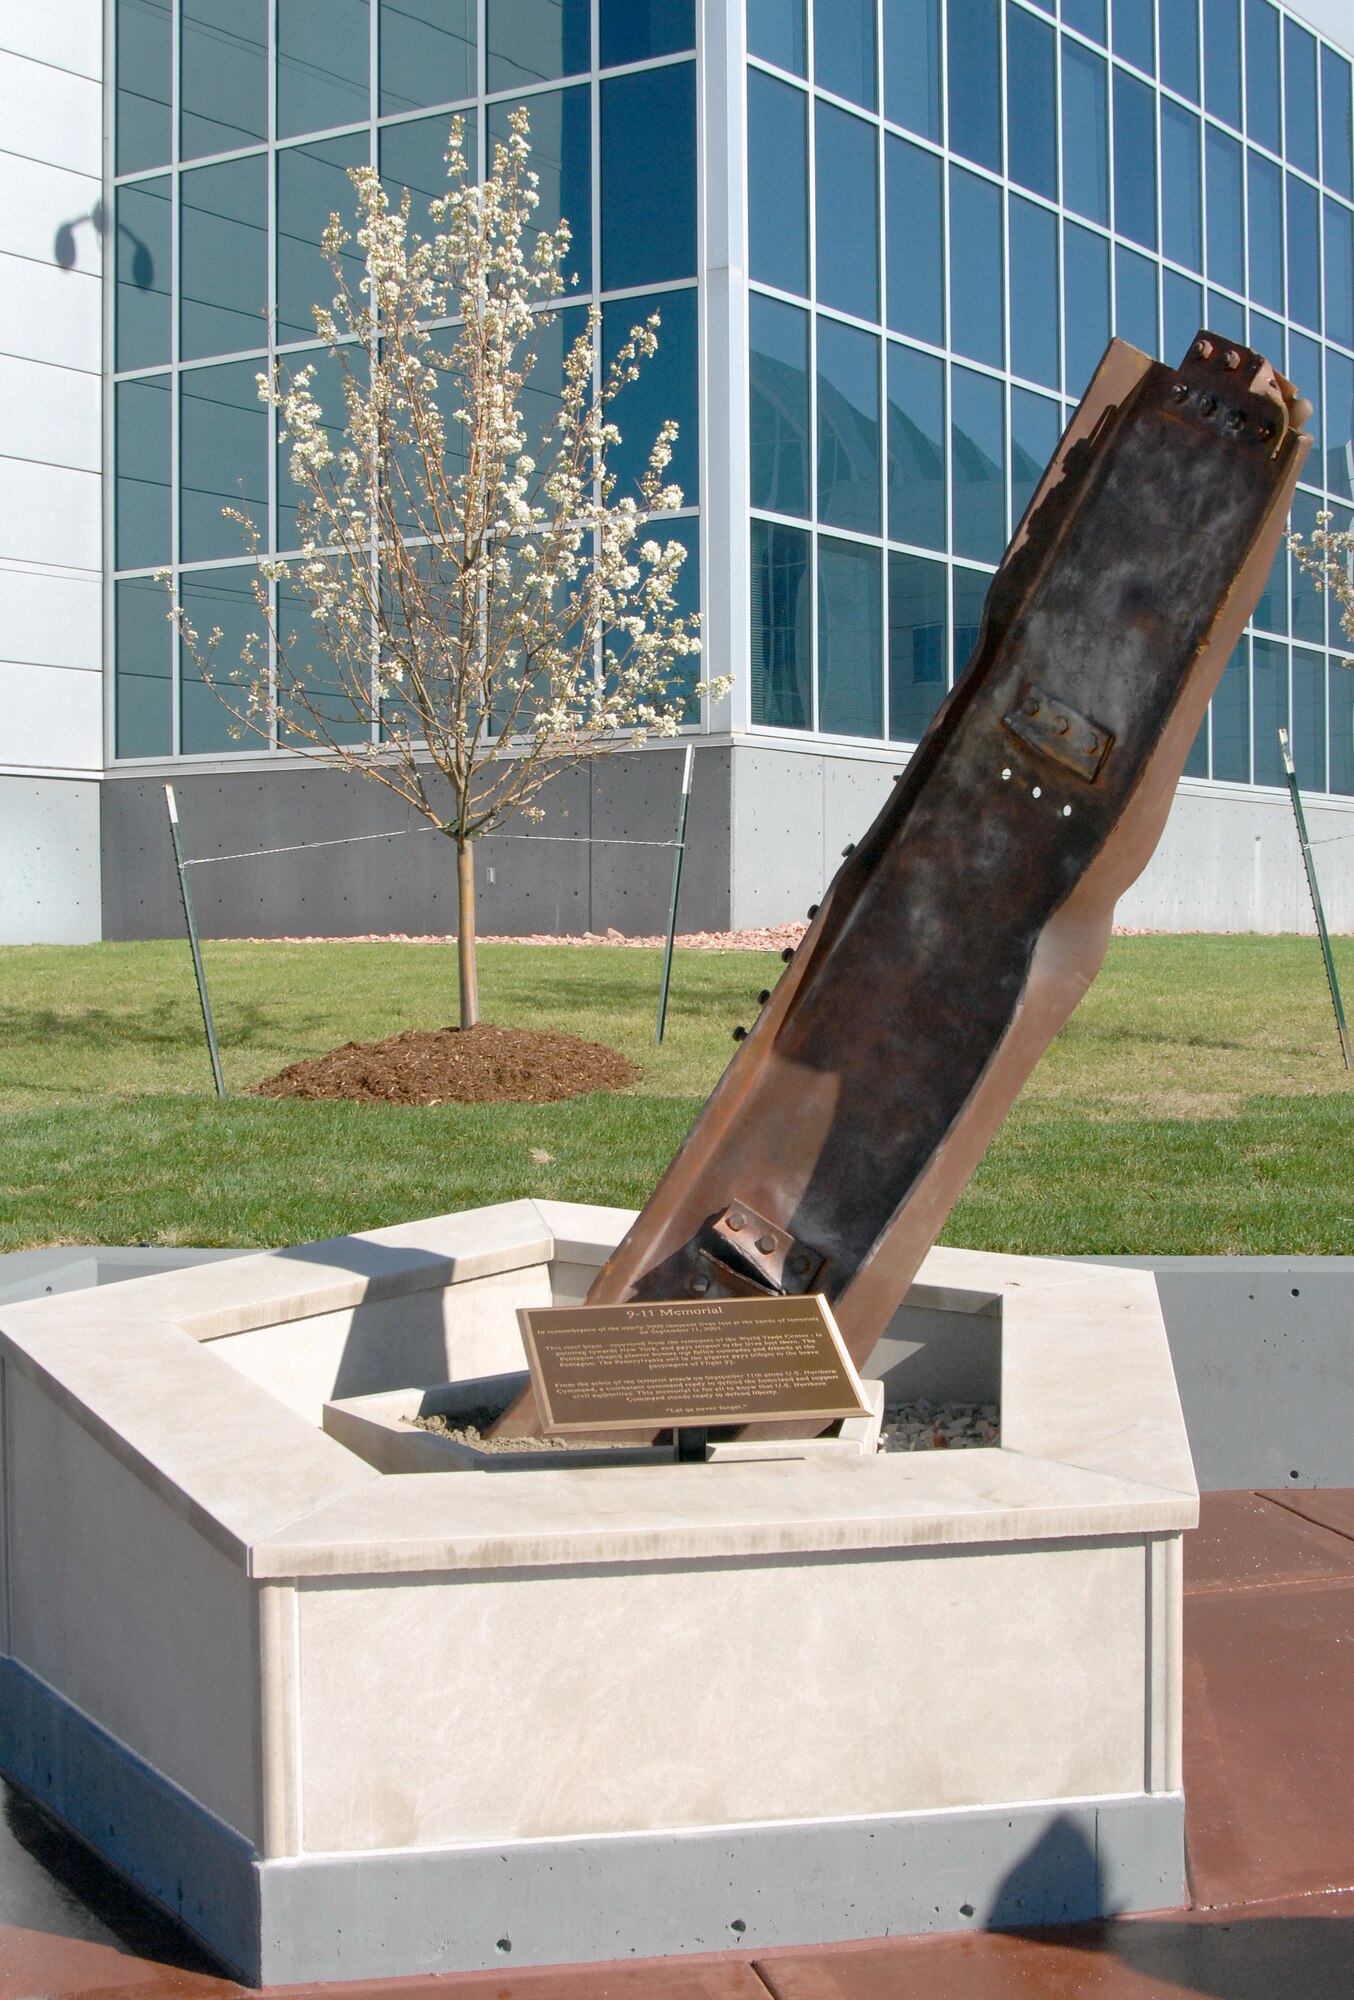 The new 9/11 memorial on the grounds of the North American Aerospace Defense Command and U.S. Northern Command headquarters includes a steel beam from the World Trade Center donated to NORAD and USNORTHCOM by the National Homeland Defense Foundation. The beam forms the heart of this new memorial. (Air Force photo/Staff Sgt. Thomas J. Doscher)